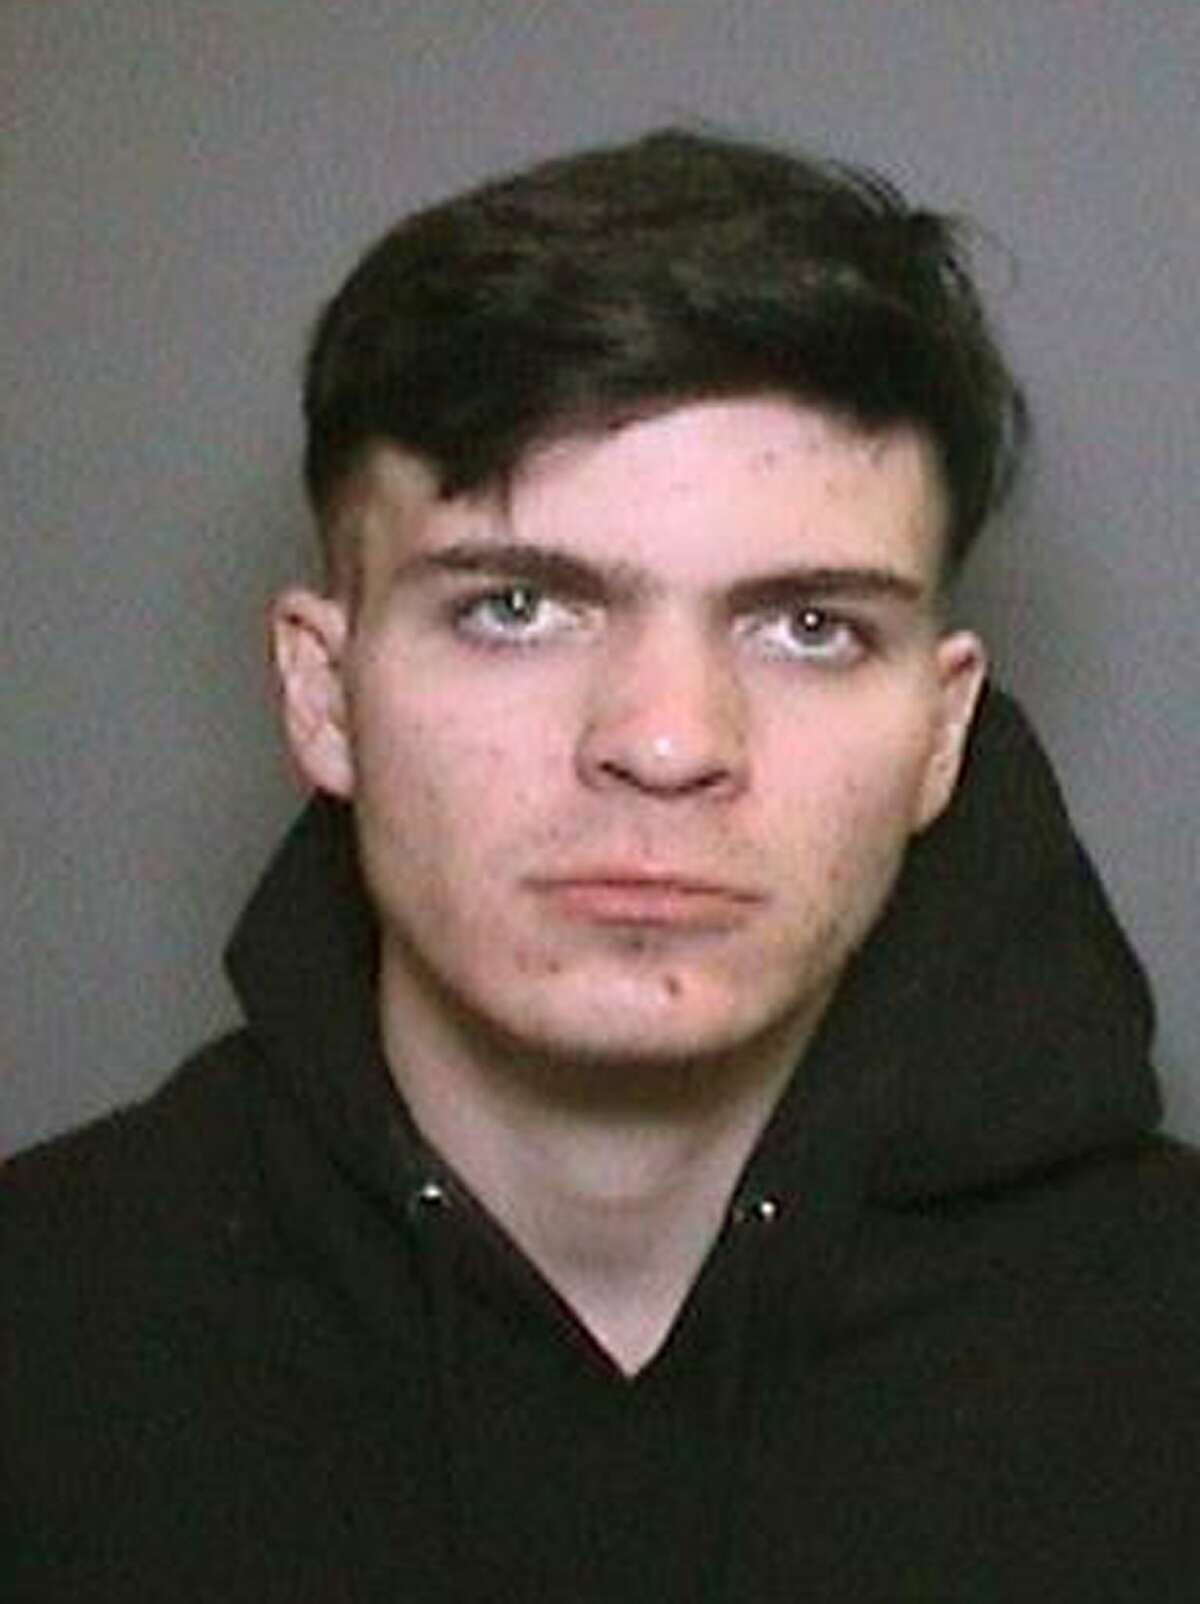 This Friday, Jan. 12, 2018 booking photo provided by the Orange County, Calif., Sheriff's Department shows Samuel Lincoln Woodward, 20. Authorities arrested Woodward, described as a friend of Blaze Bernstein, in the killing of the 19-year-old University of Pennsylvania student found buried Jan. 8, in a shallow grave at a park in Lake Forest, Calif. Undersheriff Don Barnes says DNA evidence links Woodward to the crime. (Orange County Sheriff's Department via AP)